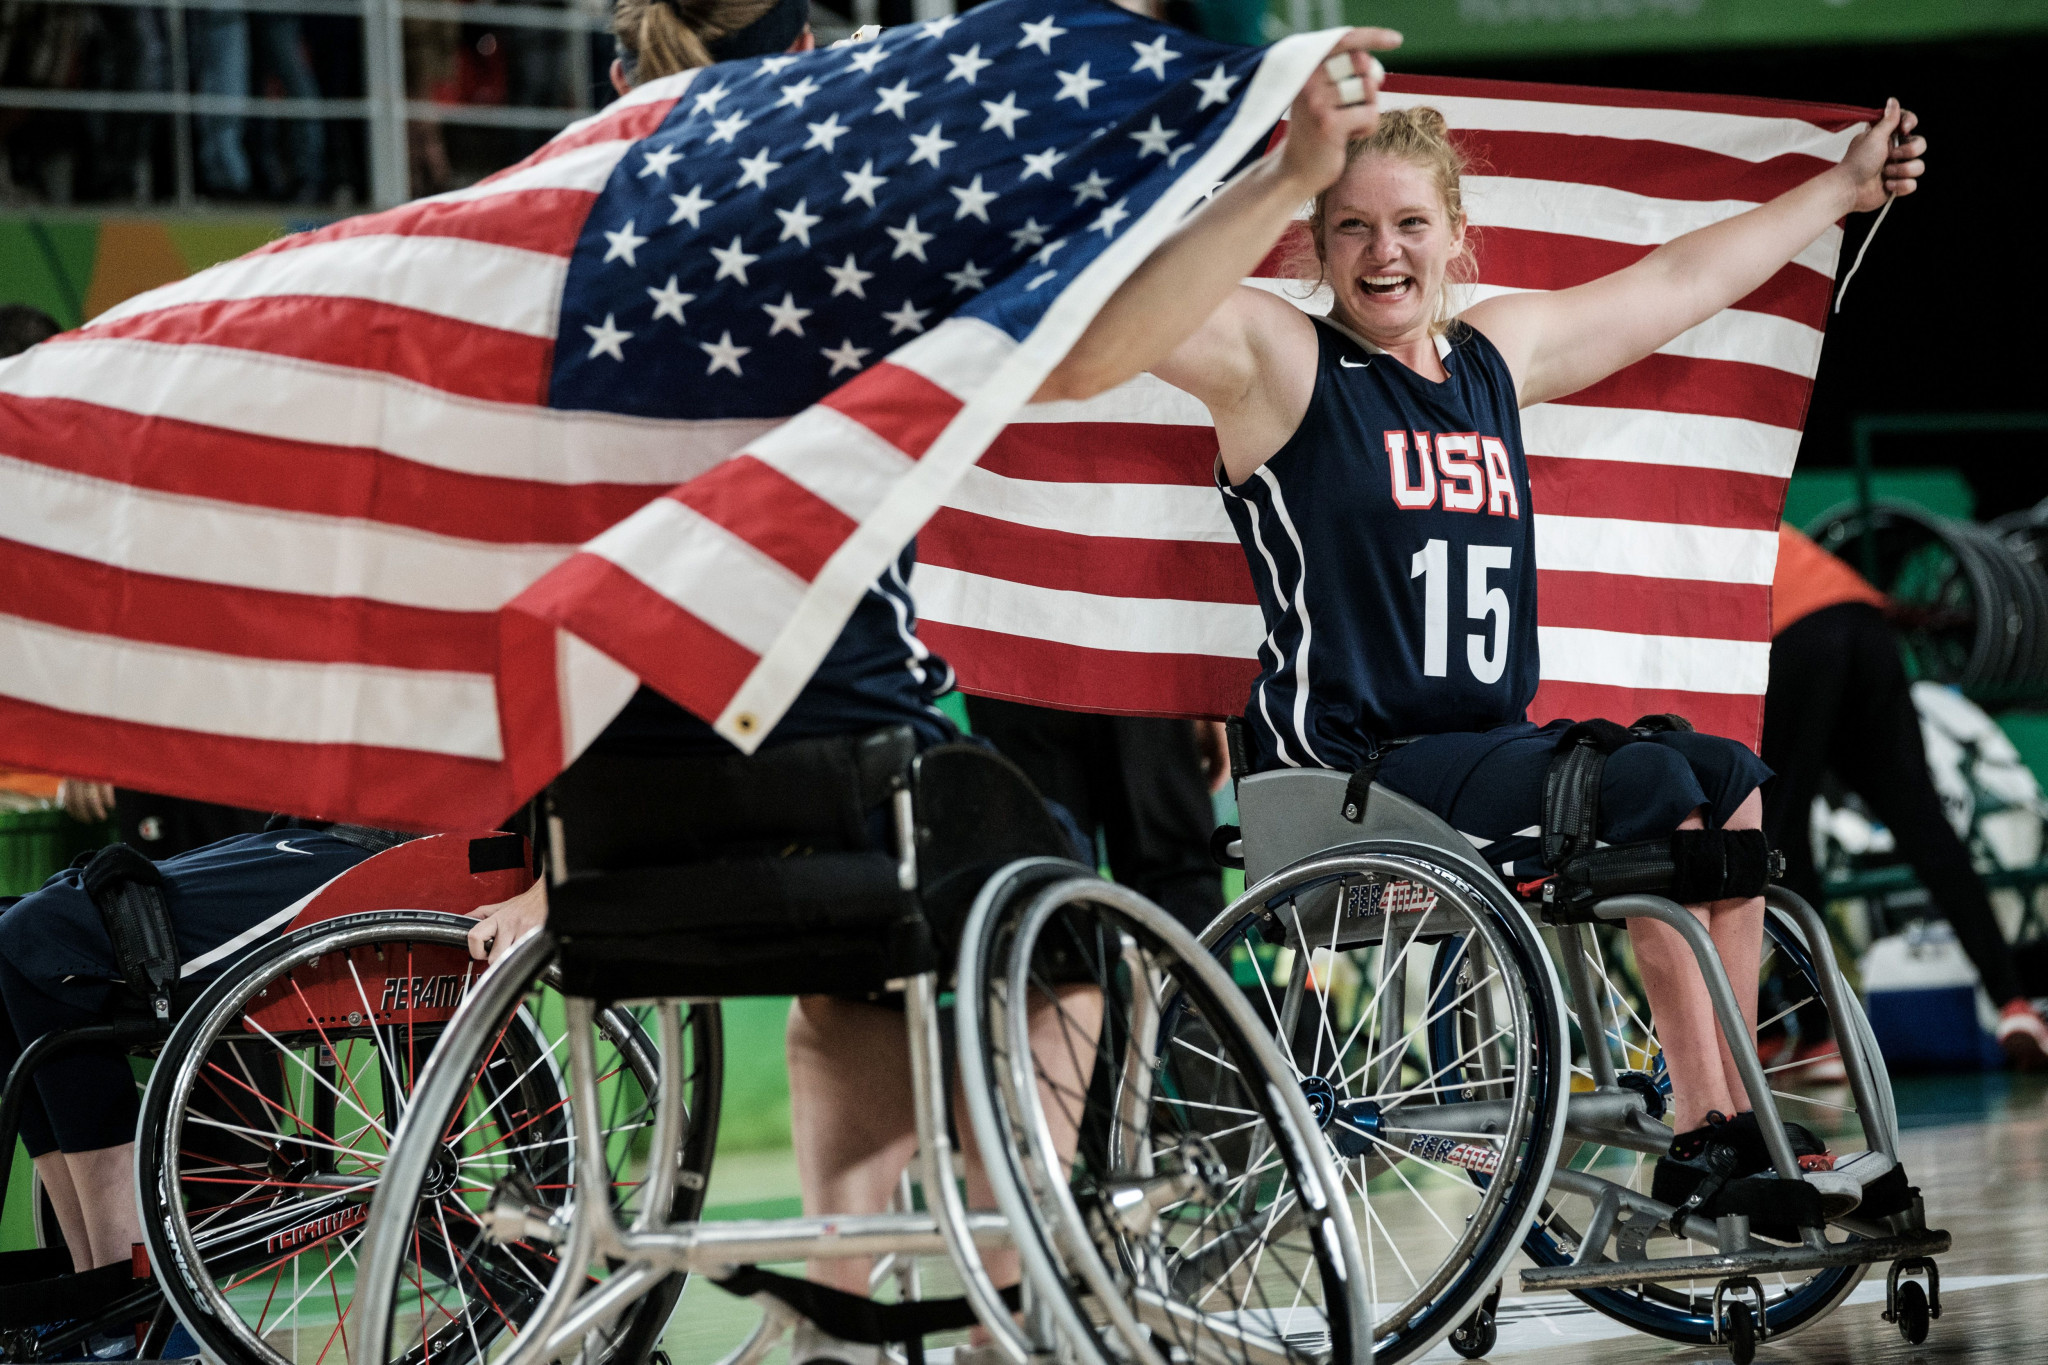 NWBA Hall of Fame member Trooper Johnson has been named head coach of the women's national team for 2019 ©Getty Images